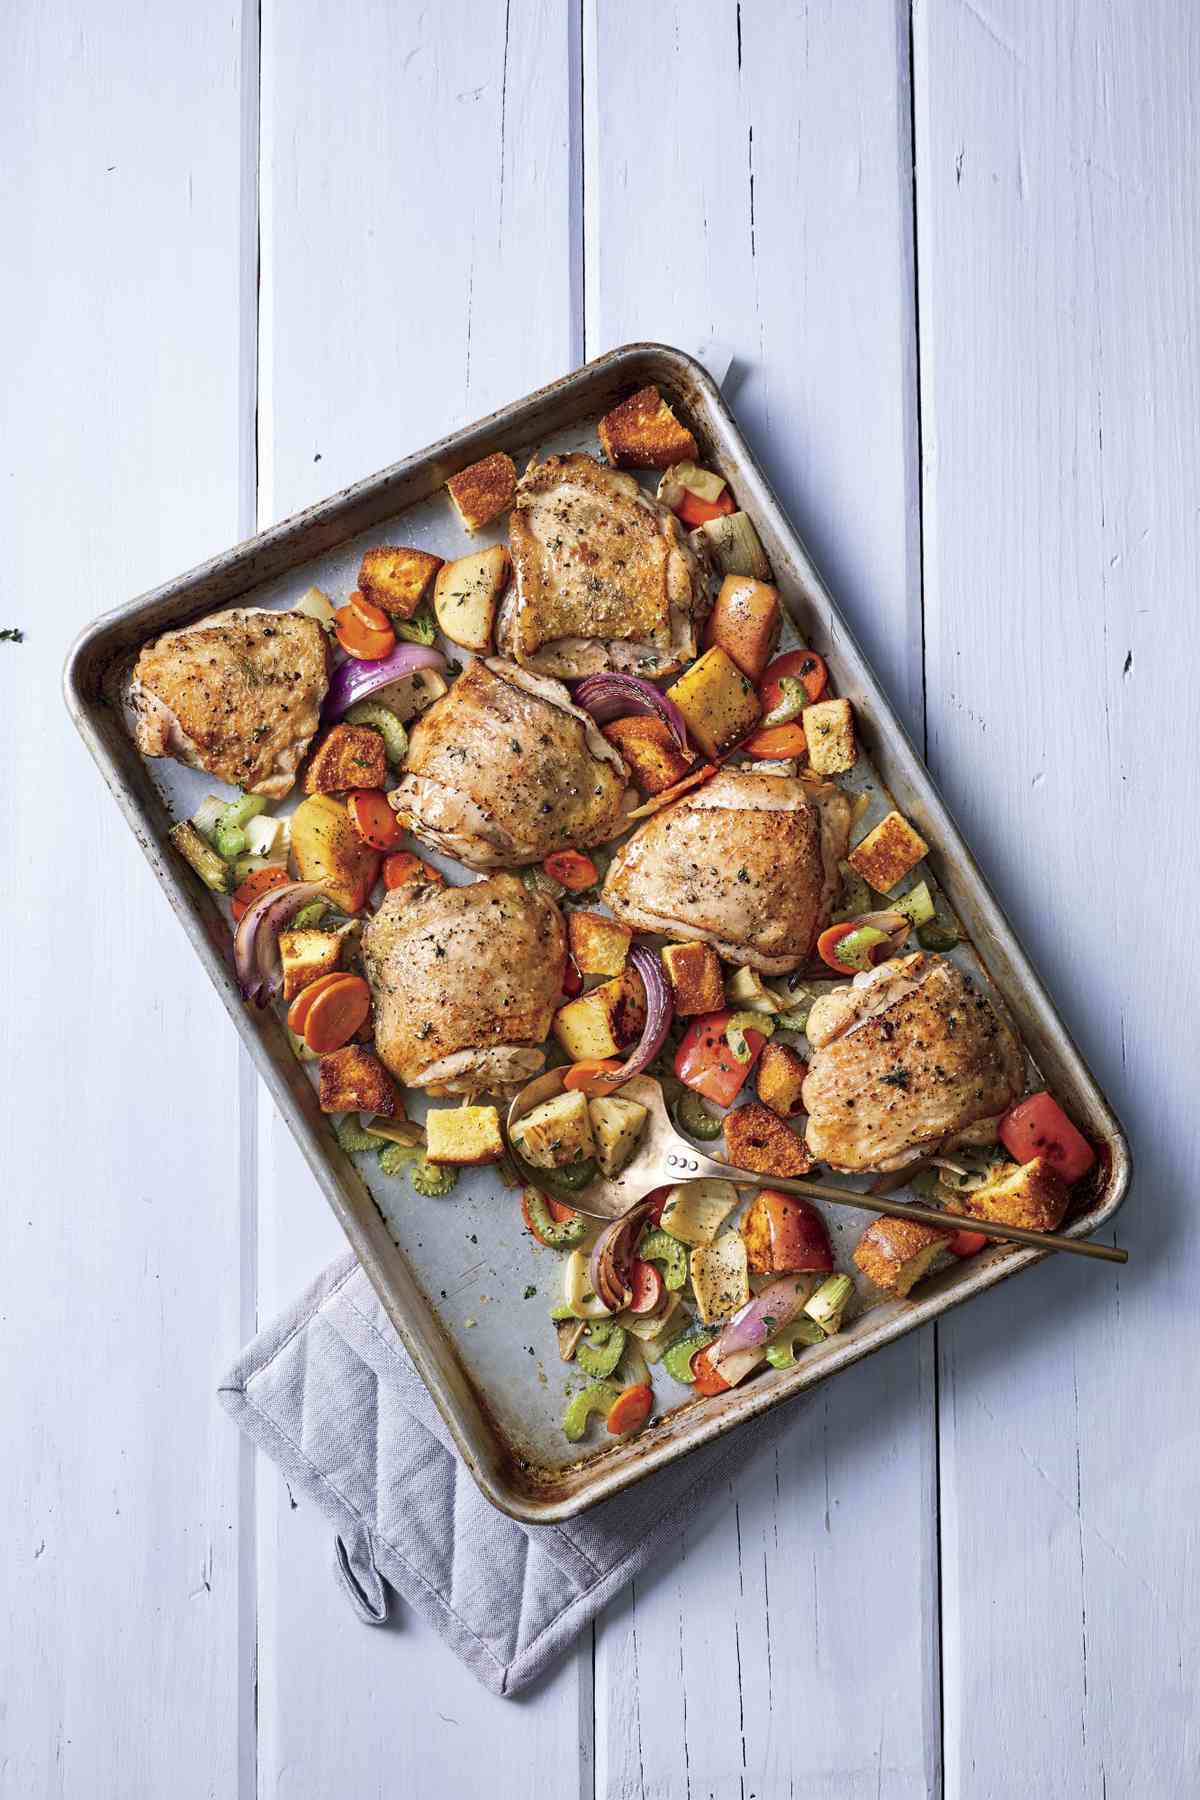 Baked Chicken Thighs with Dressing